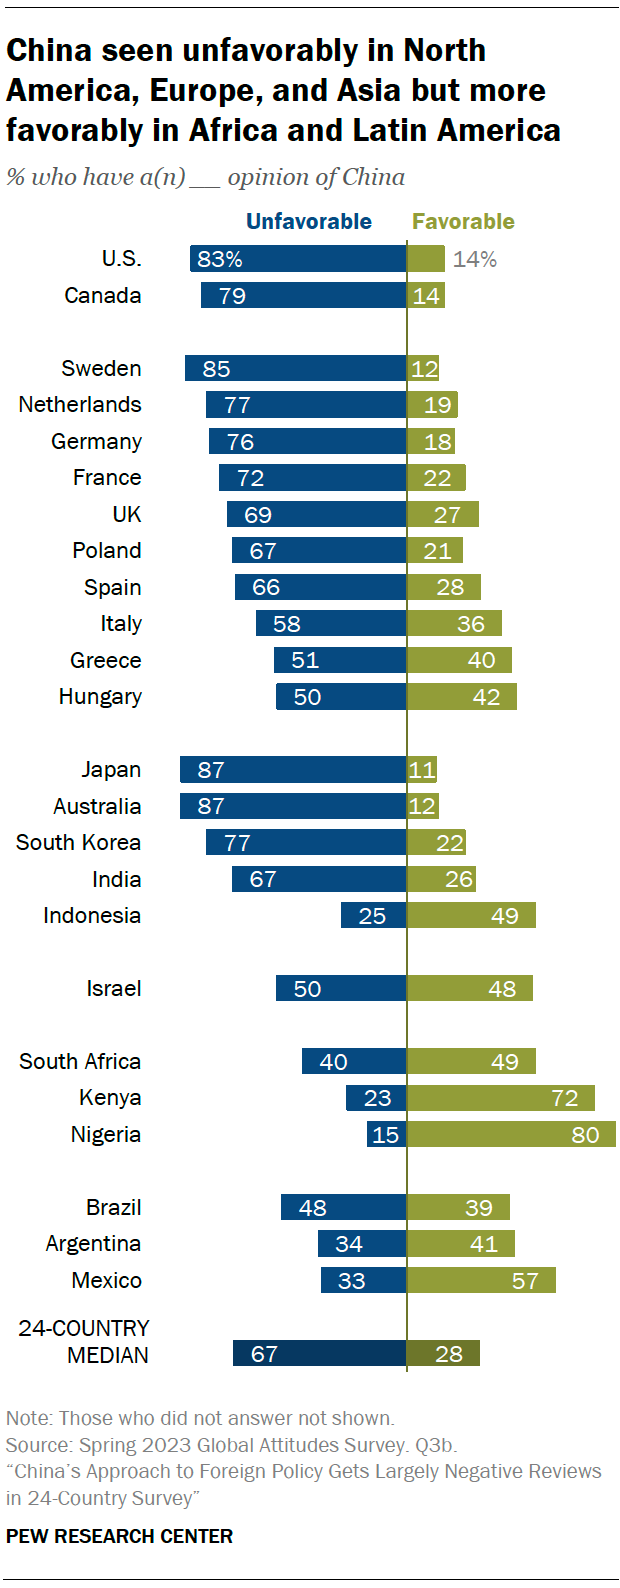 China seen unfavorably in North America, Europe, and Asia but more favorably in Africa and Latin America